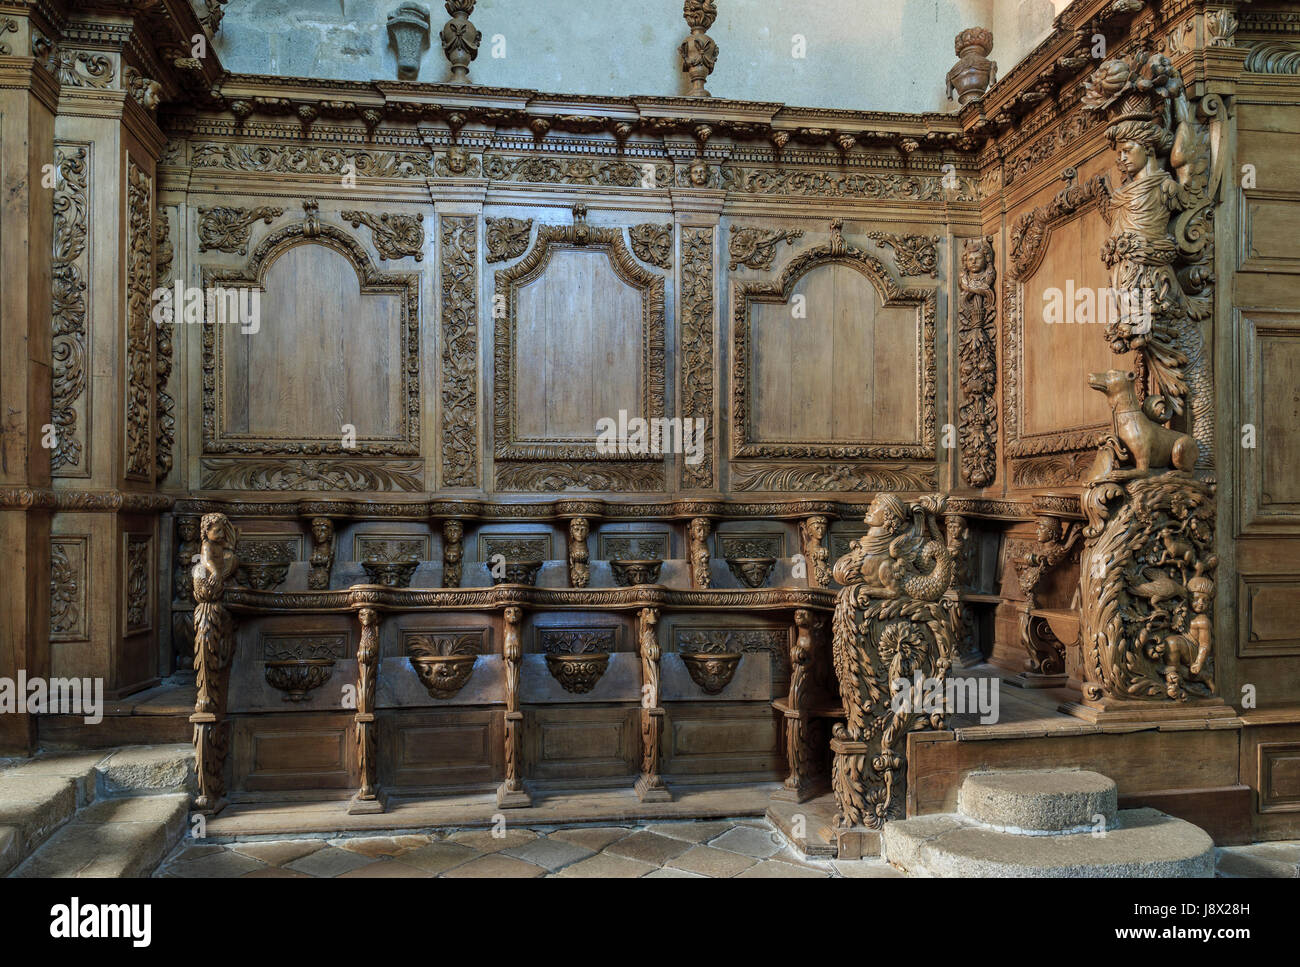 France, Creuse, Moutier-d'Ahun, Moutier d'Ahun abbey, the carved woodwork in the church Stock Photo